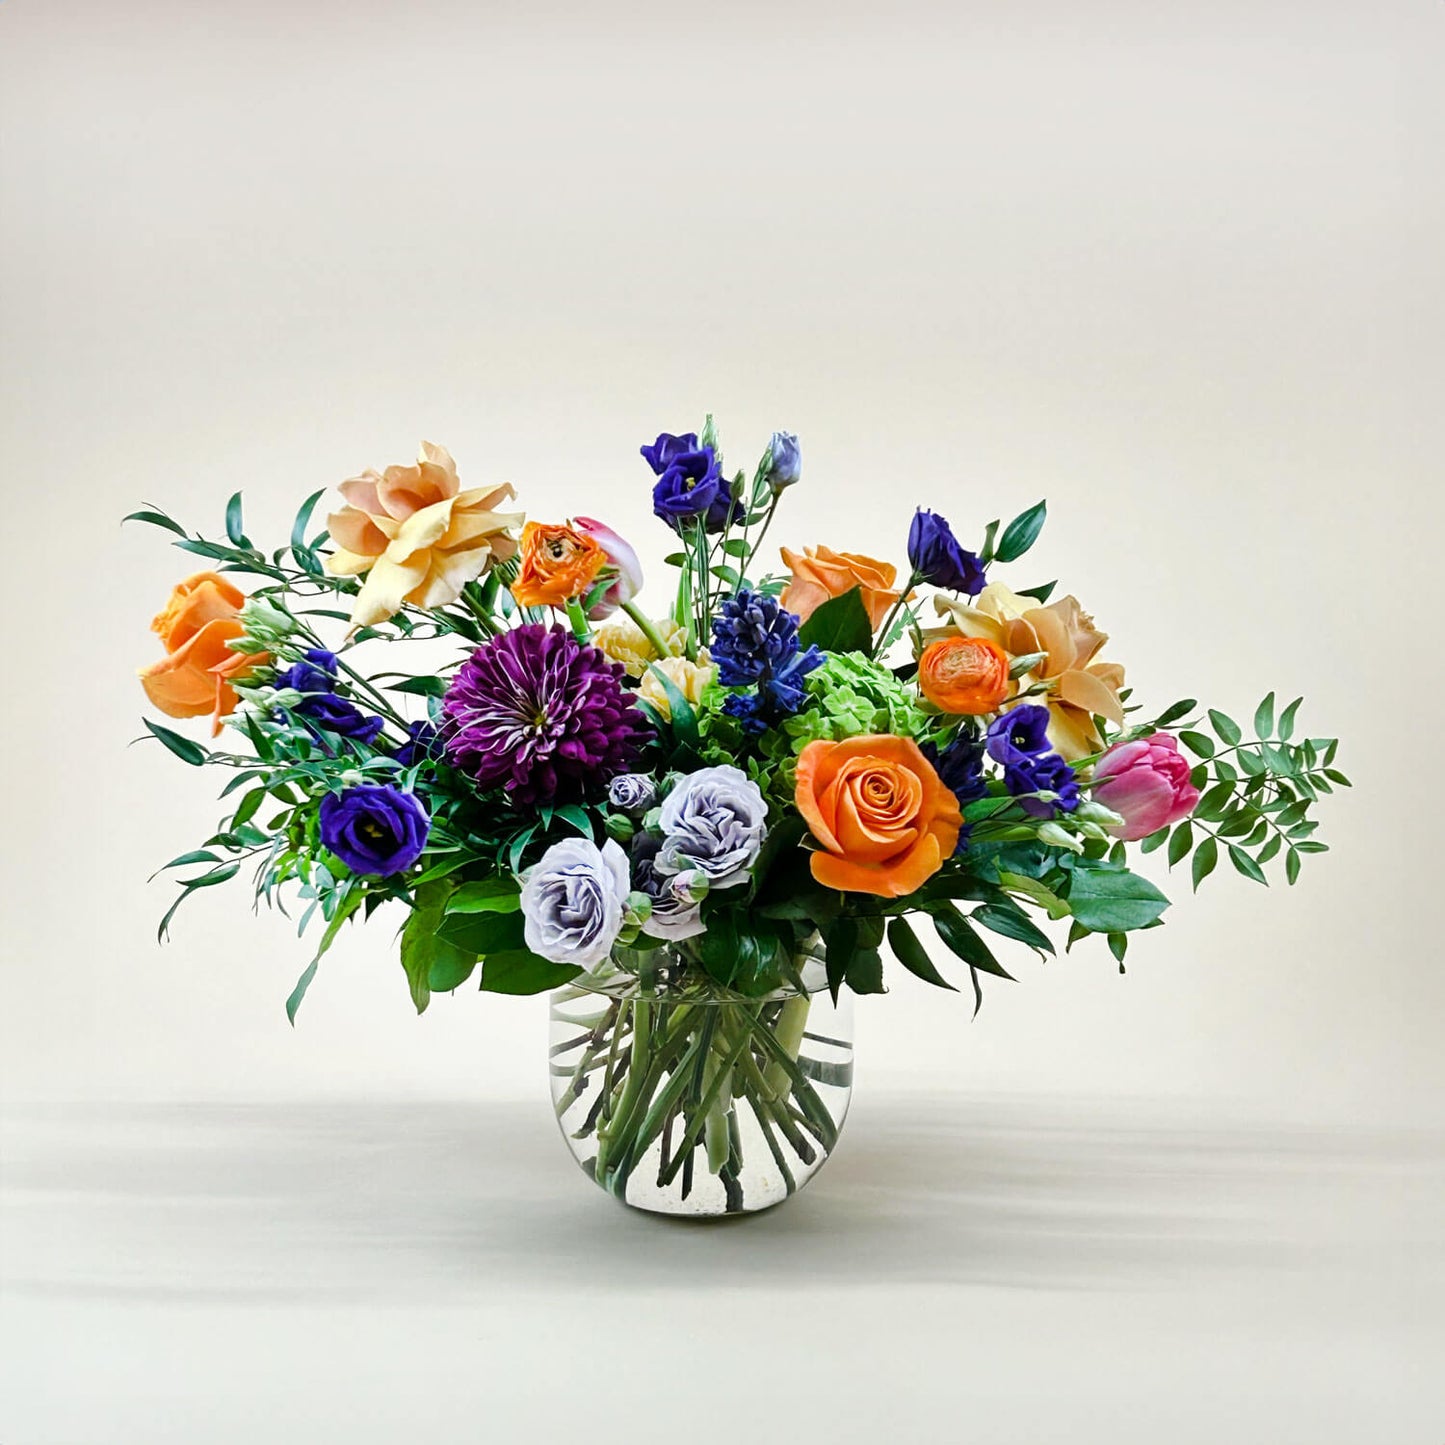 Image of a dynamic bouquet featuring yellow and lavender hues transitioning into deeper purple tones, with accents of citrus orange for vibrancy. A thoughtful and romantic combination. Order online for same-day flower delivery from Toronto's best florist, available near you.